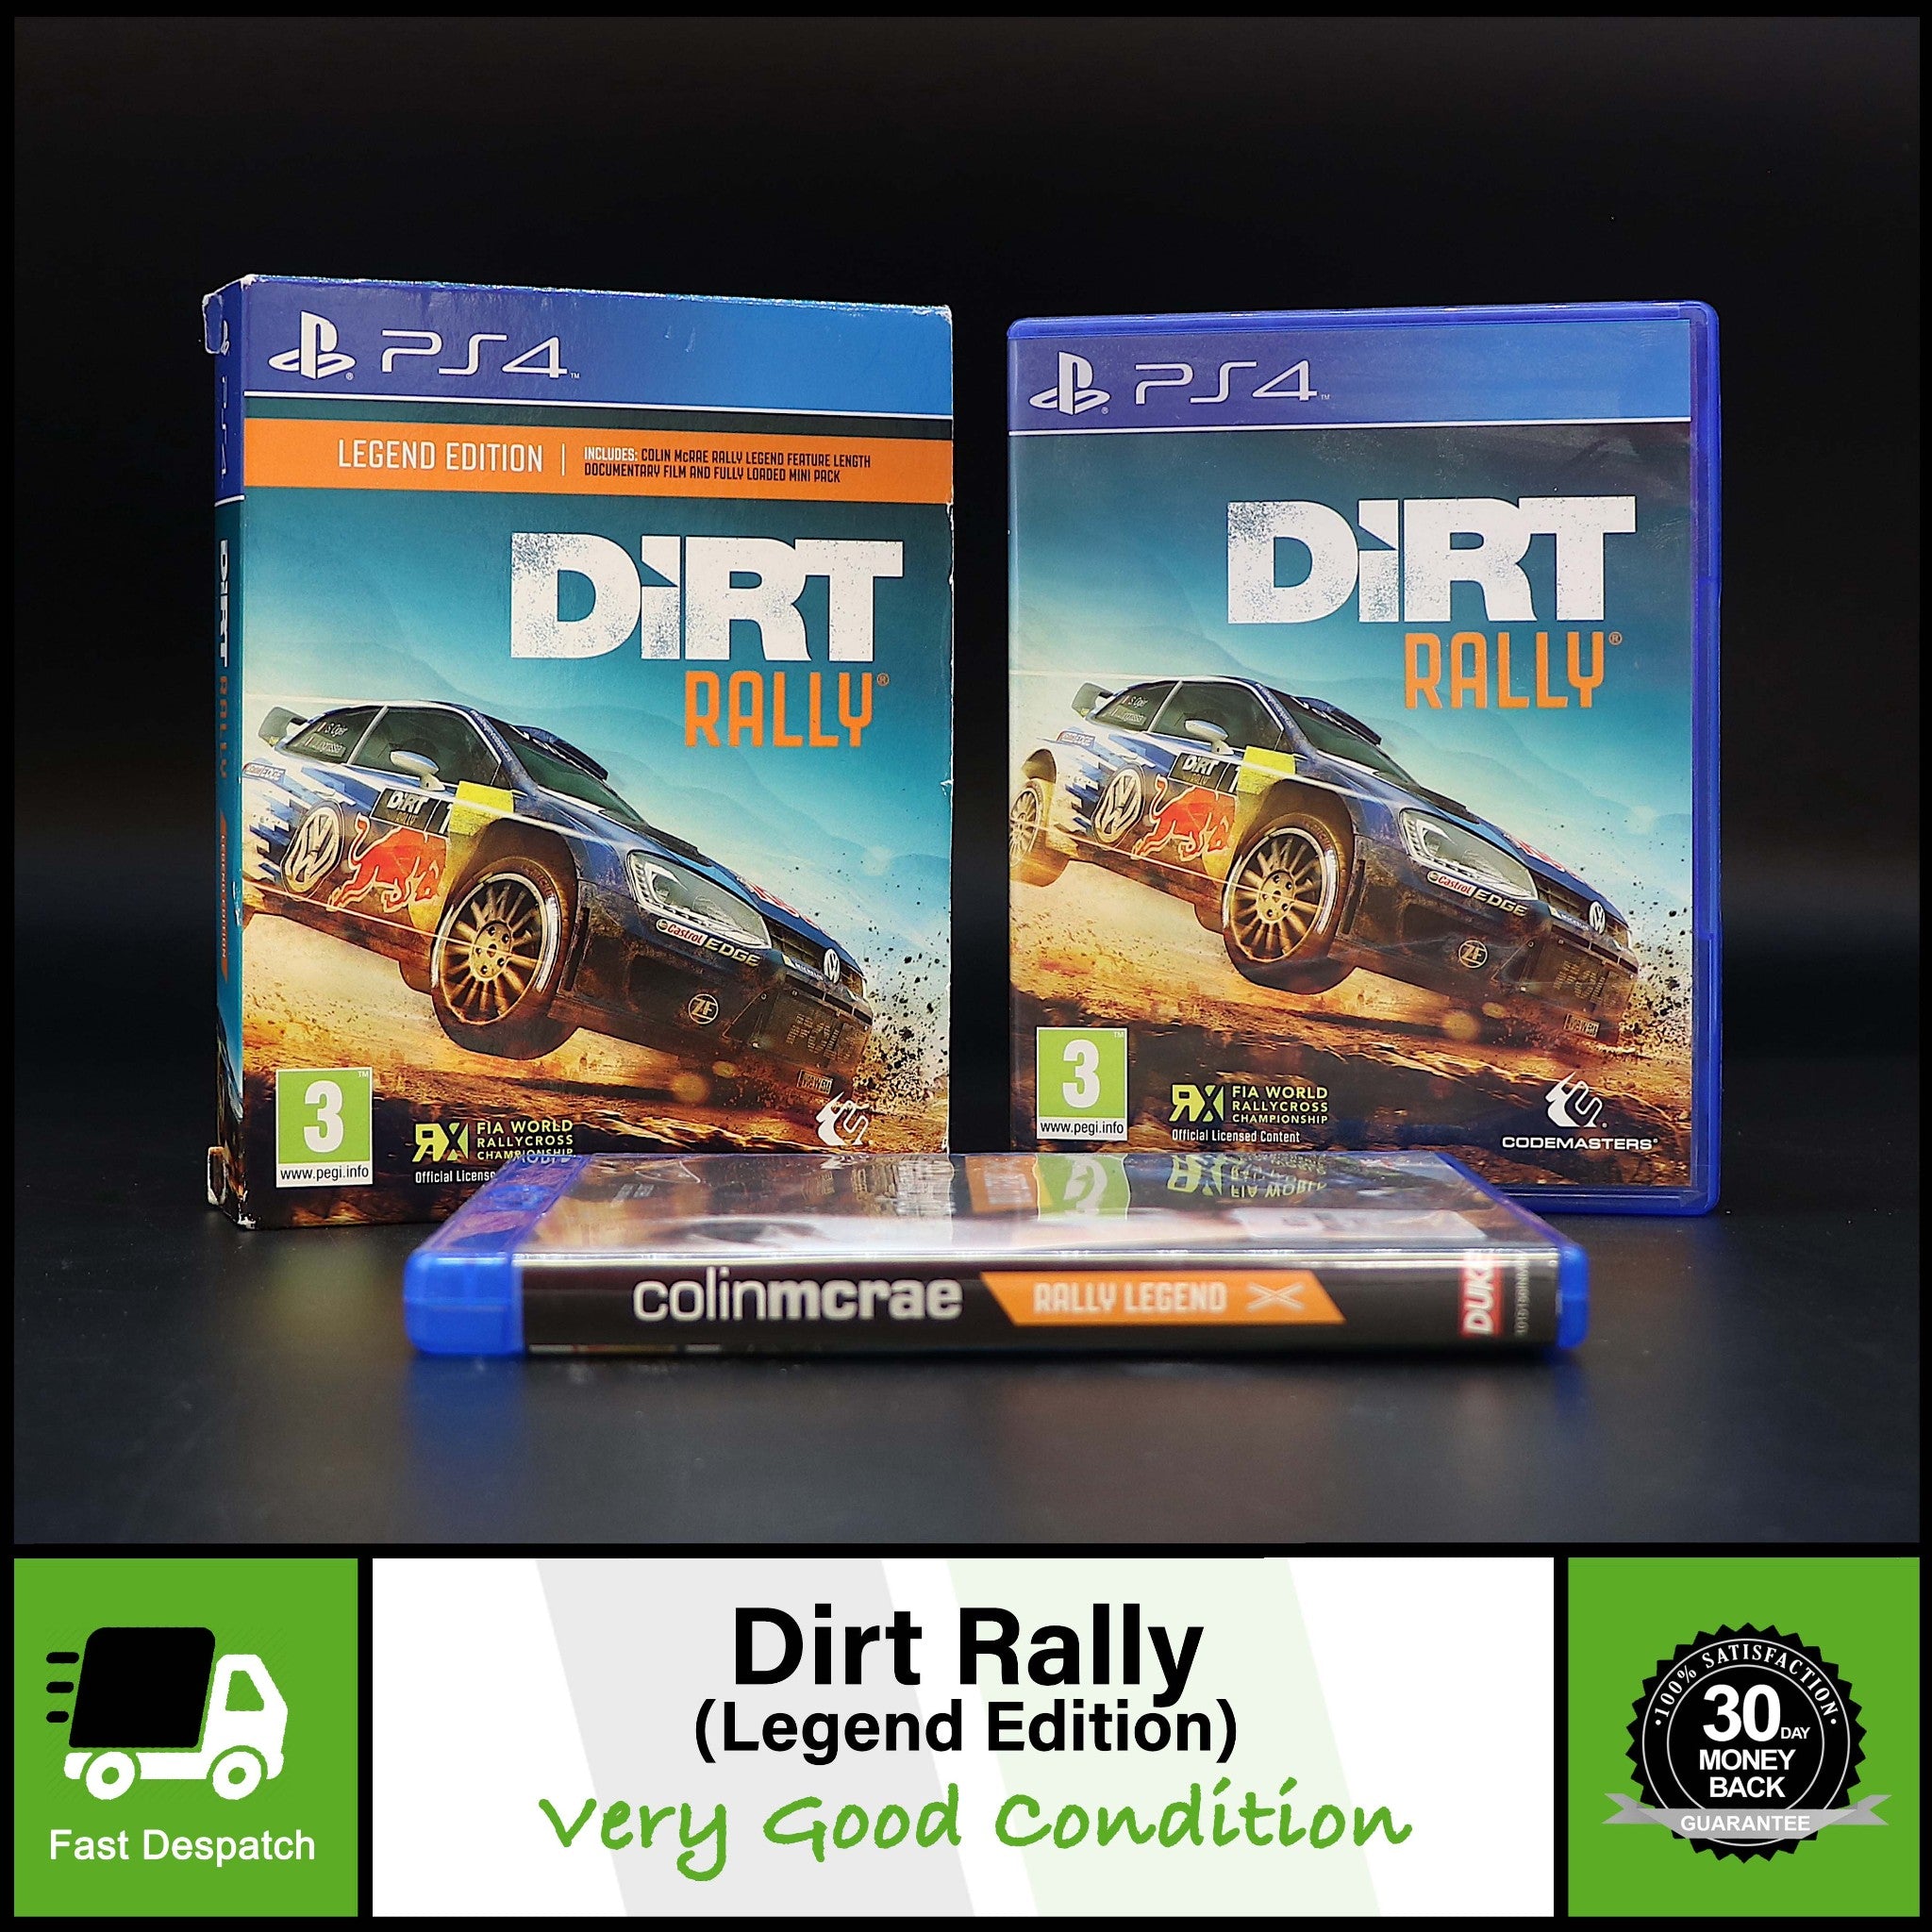 Dirt Rally, Legend Edition, Colin McRae, Sony PS4 Game